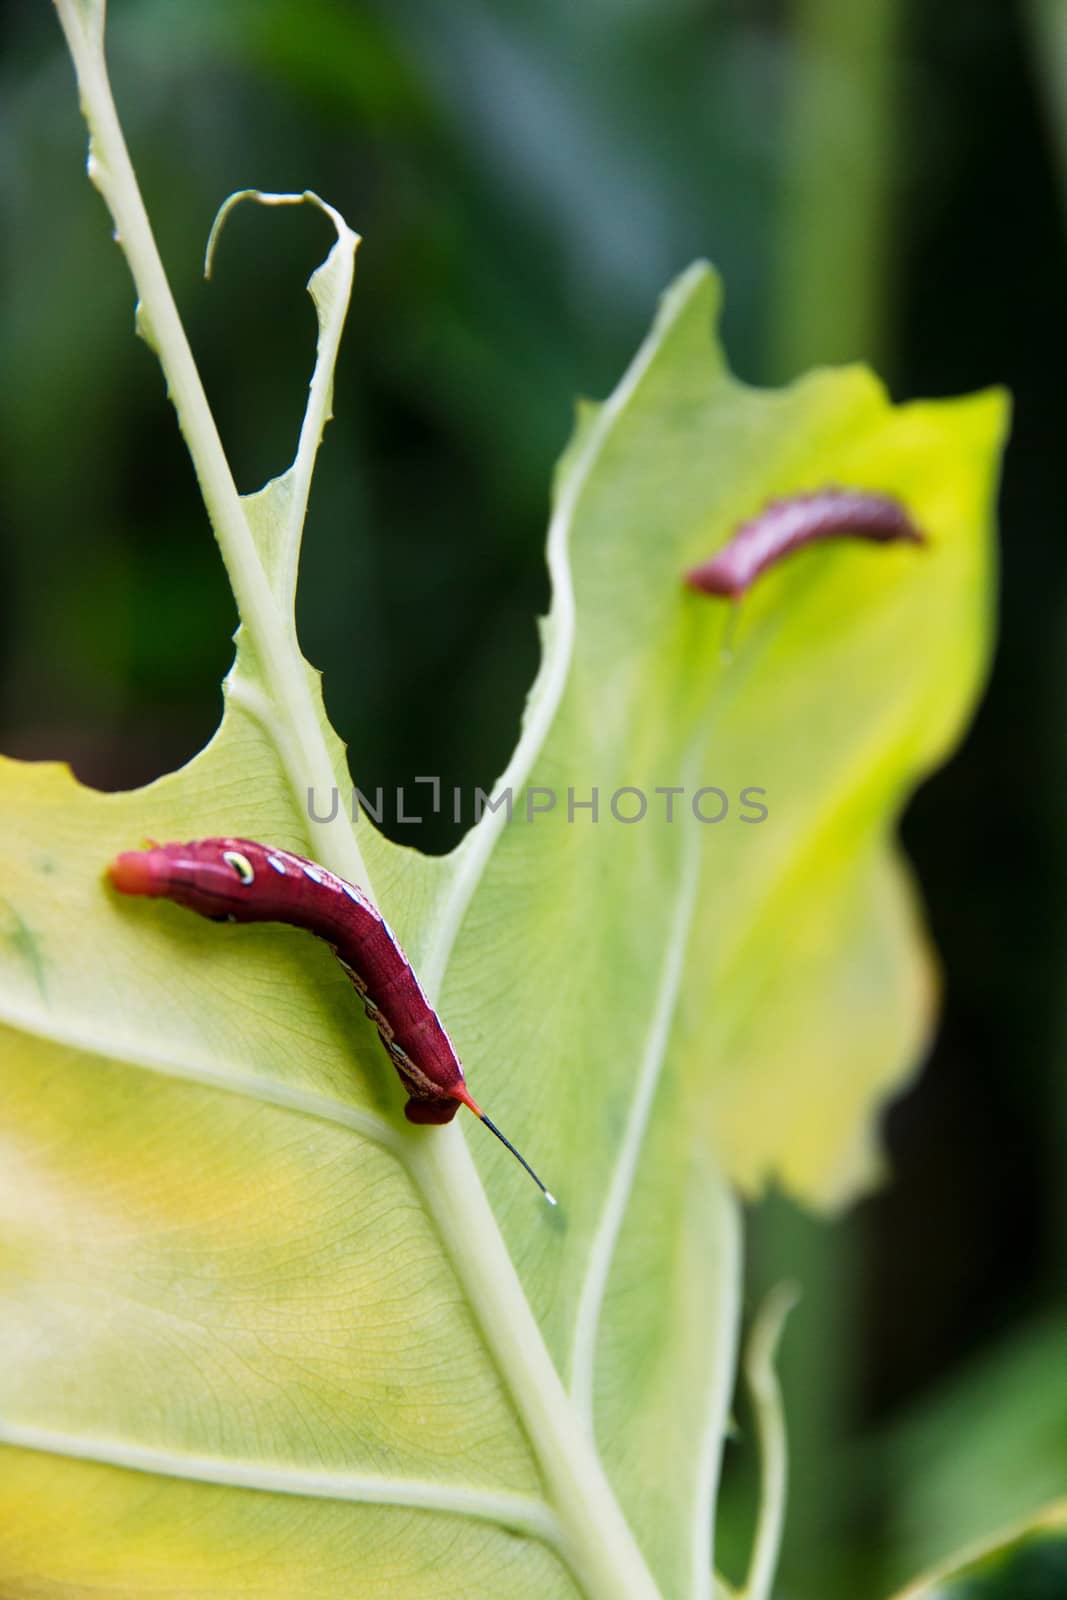 Caterpillar and a chewed leaf by ponsulak